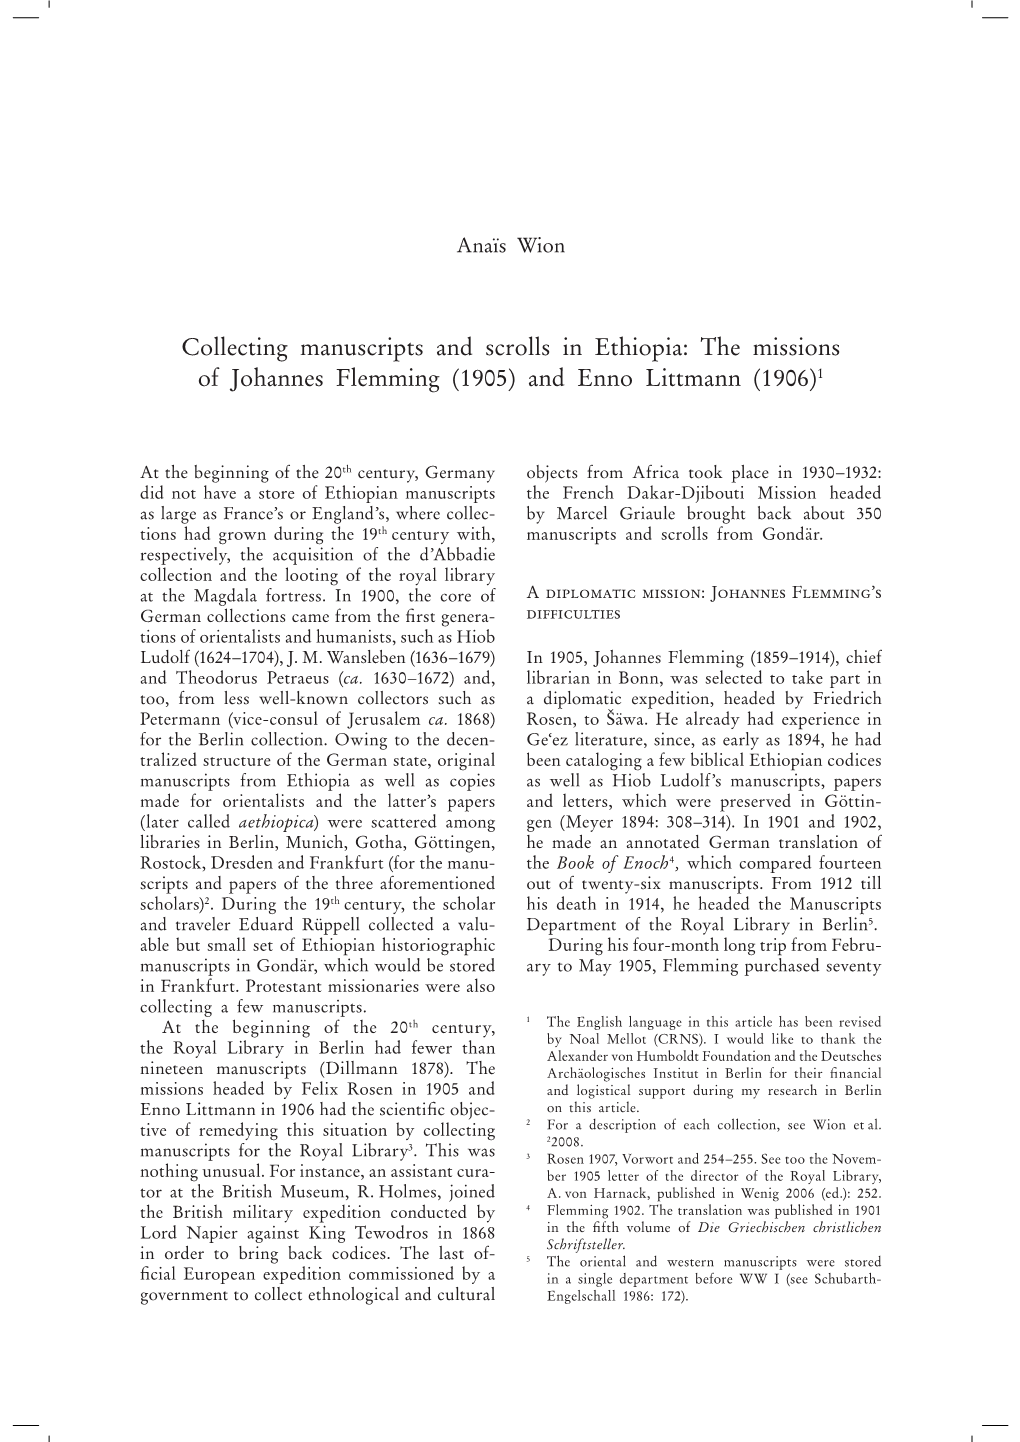 Collecting Manuscripts and Scrolls in Ethiopia: the Missions of Johannes Flemming (1905) and Enno Littmann (1906)1